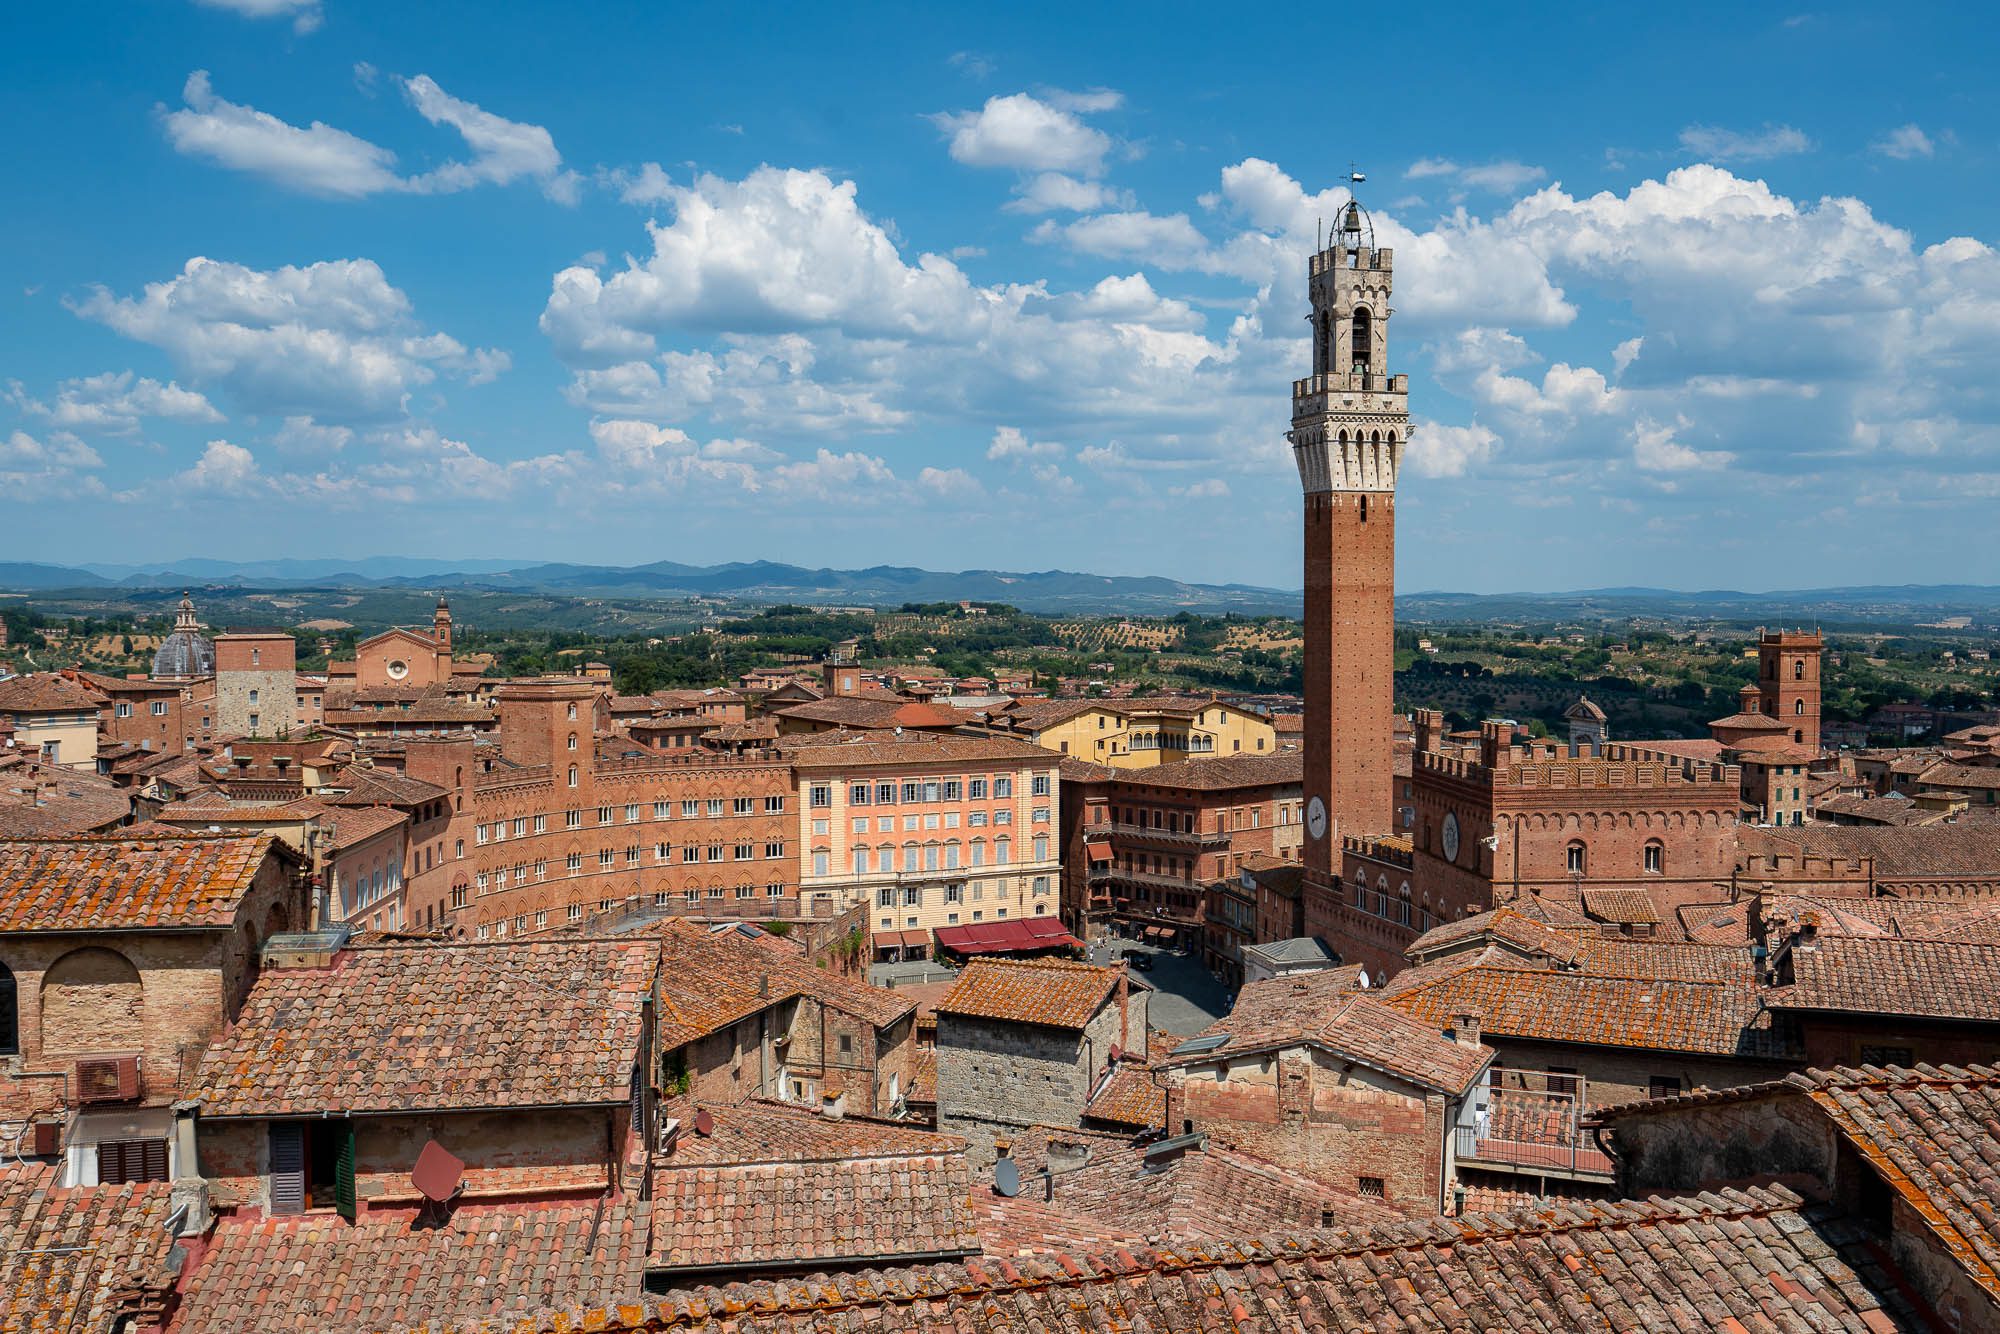 This is an aerial view of a historic Italian cityscape featuring terracotta rooftops, a prominent tower, and verdant rolling hills in the distance under a blue sky.